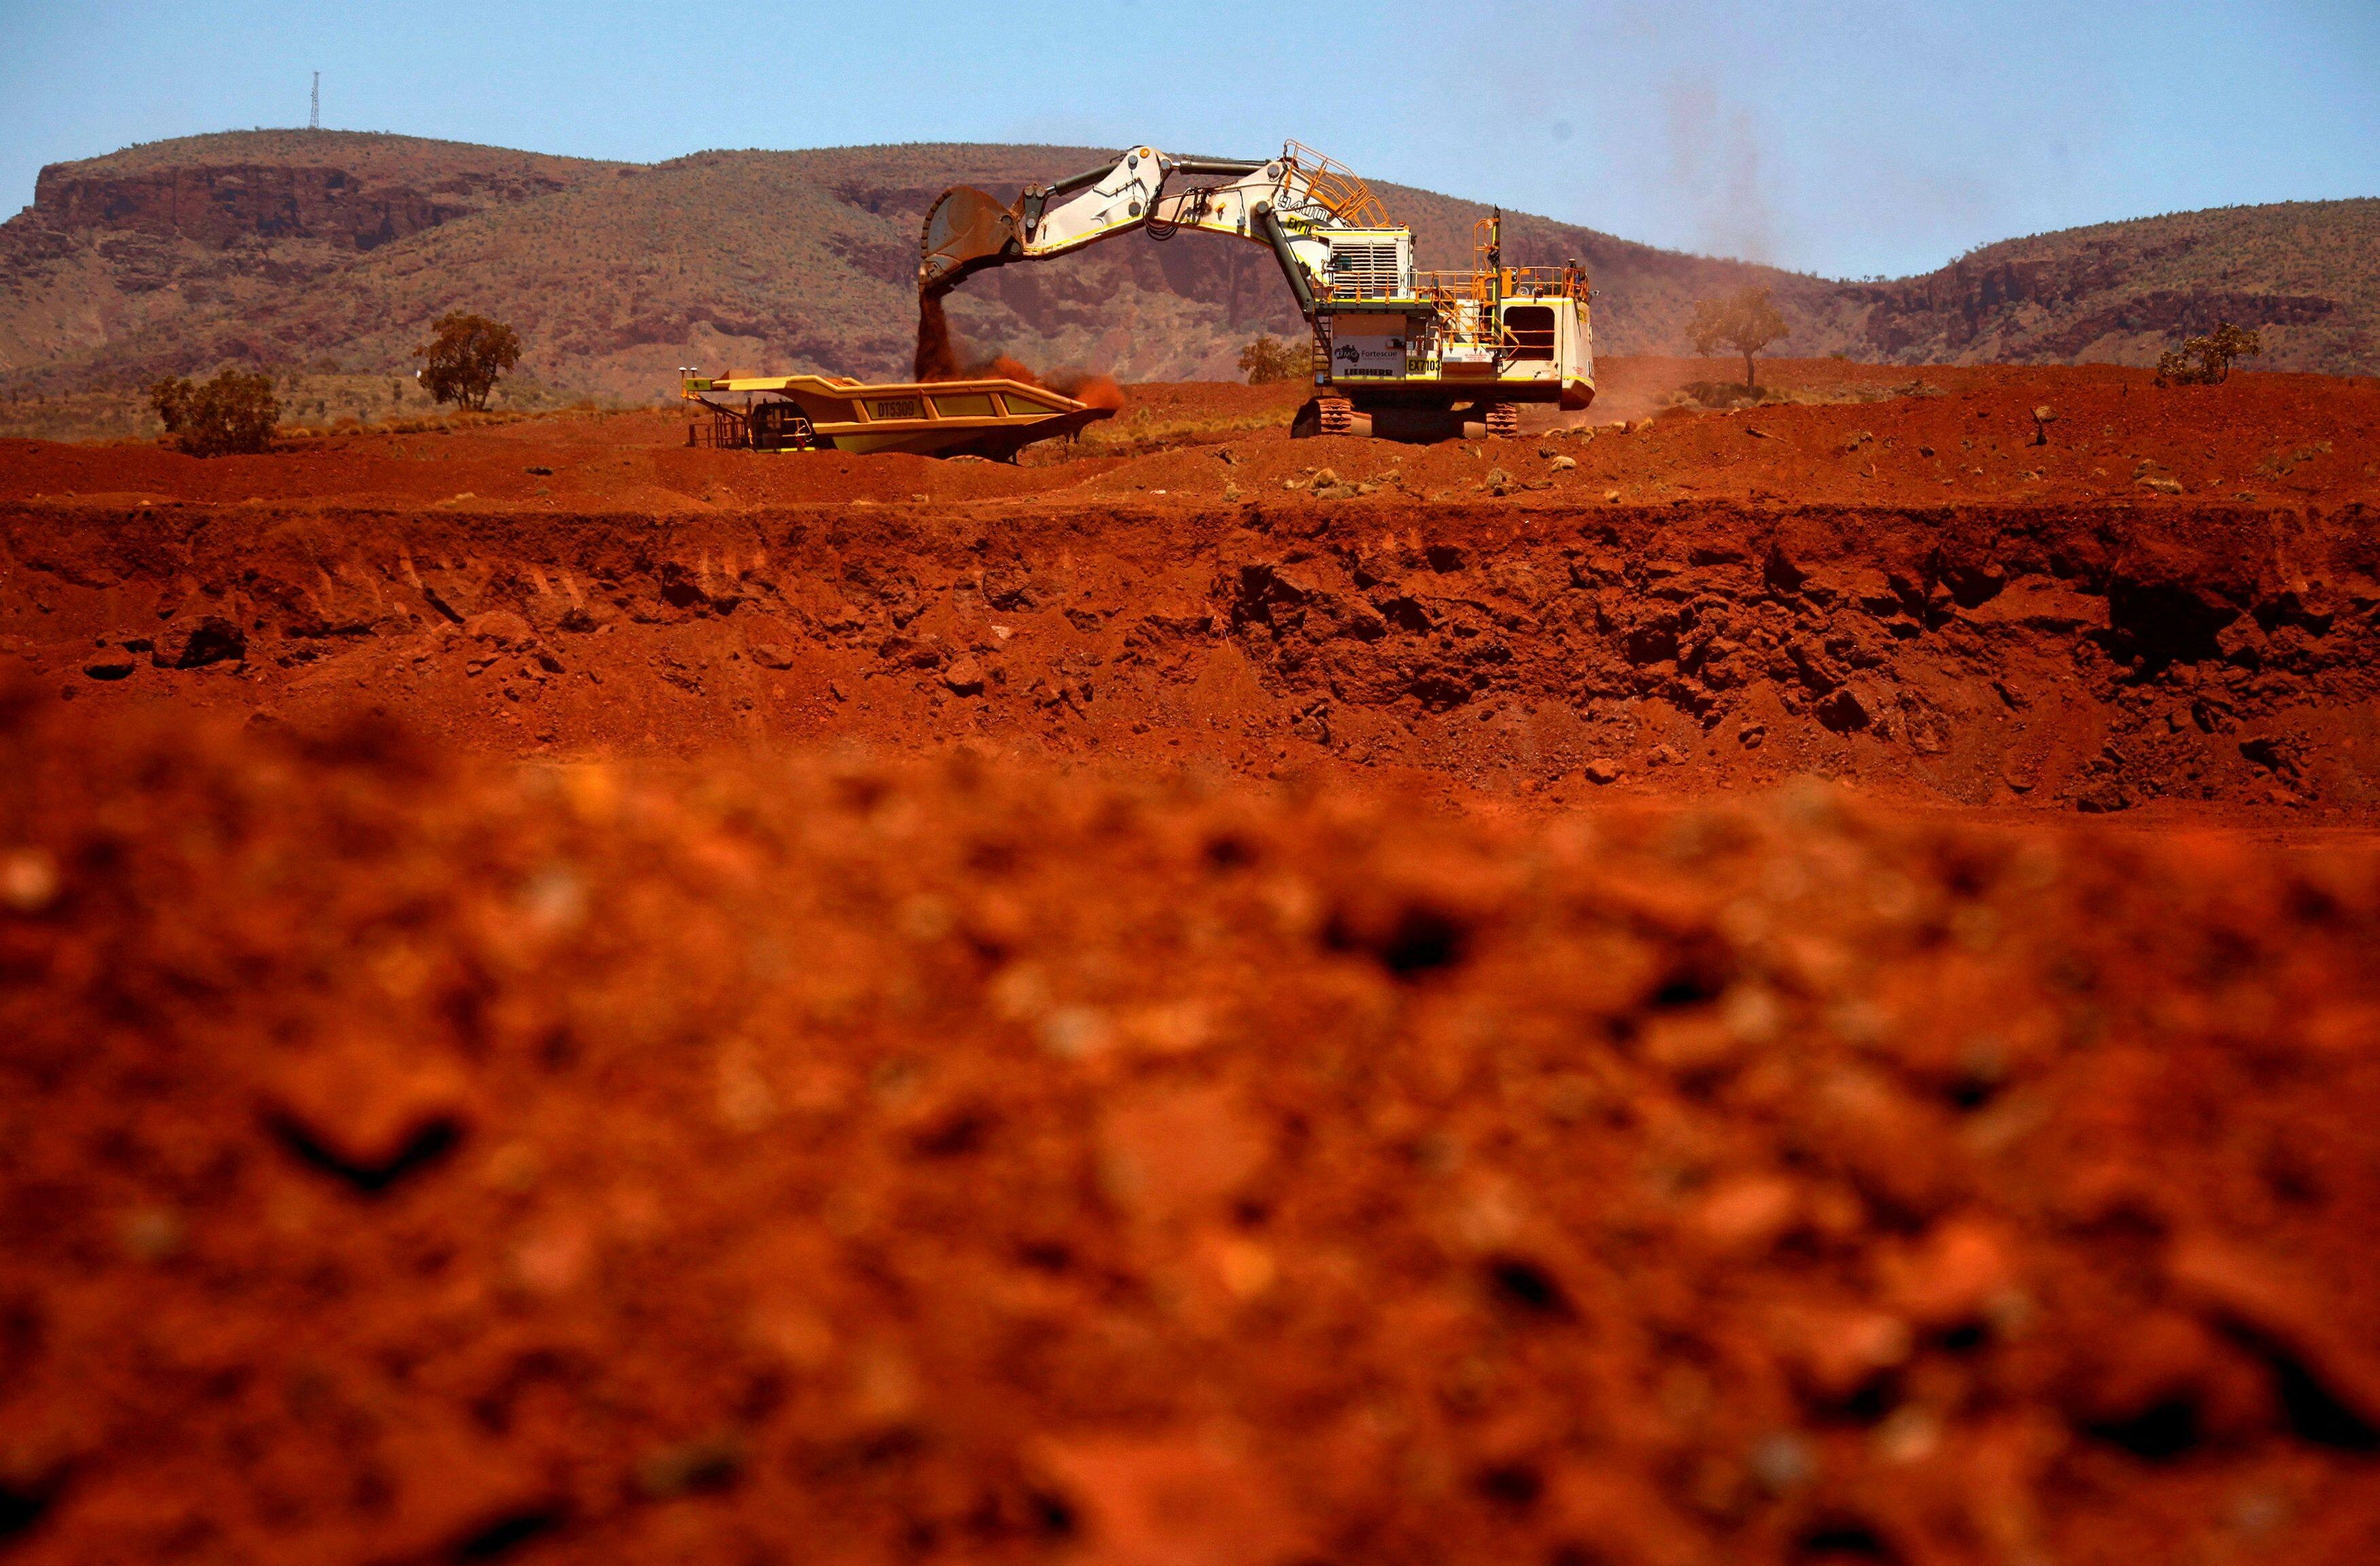 Sandur Manganese &amp; Iron Ores: The ace investor has bought 1.5 percent stake or 1.37 lakh shares in the firm. The stock has skyrocketed over 300 percent just in the last 1 year. REUTERS/David Gray/File Photo